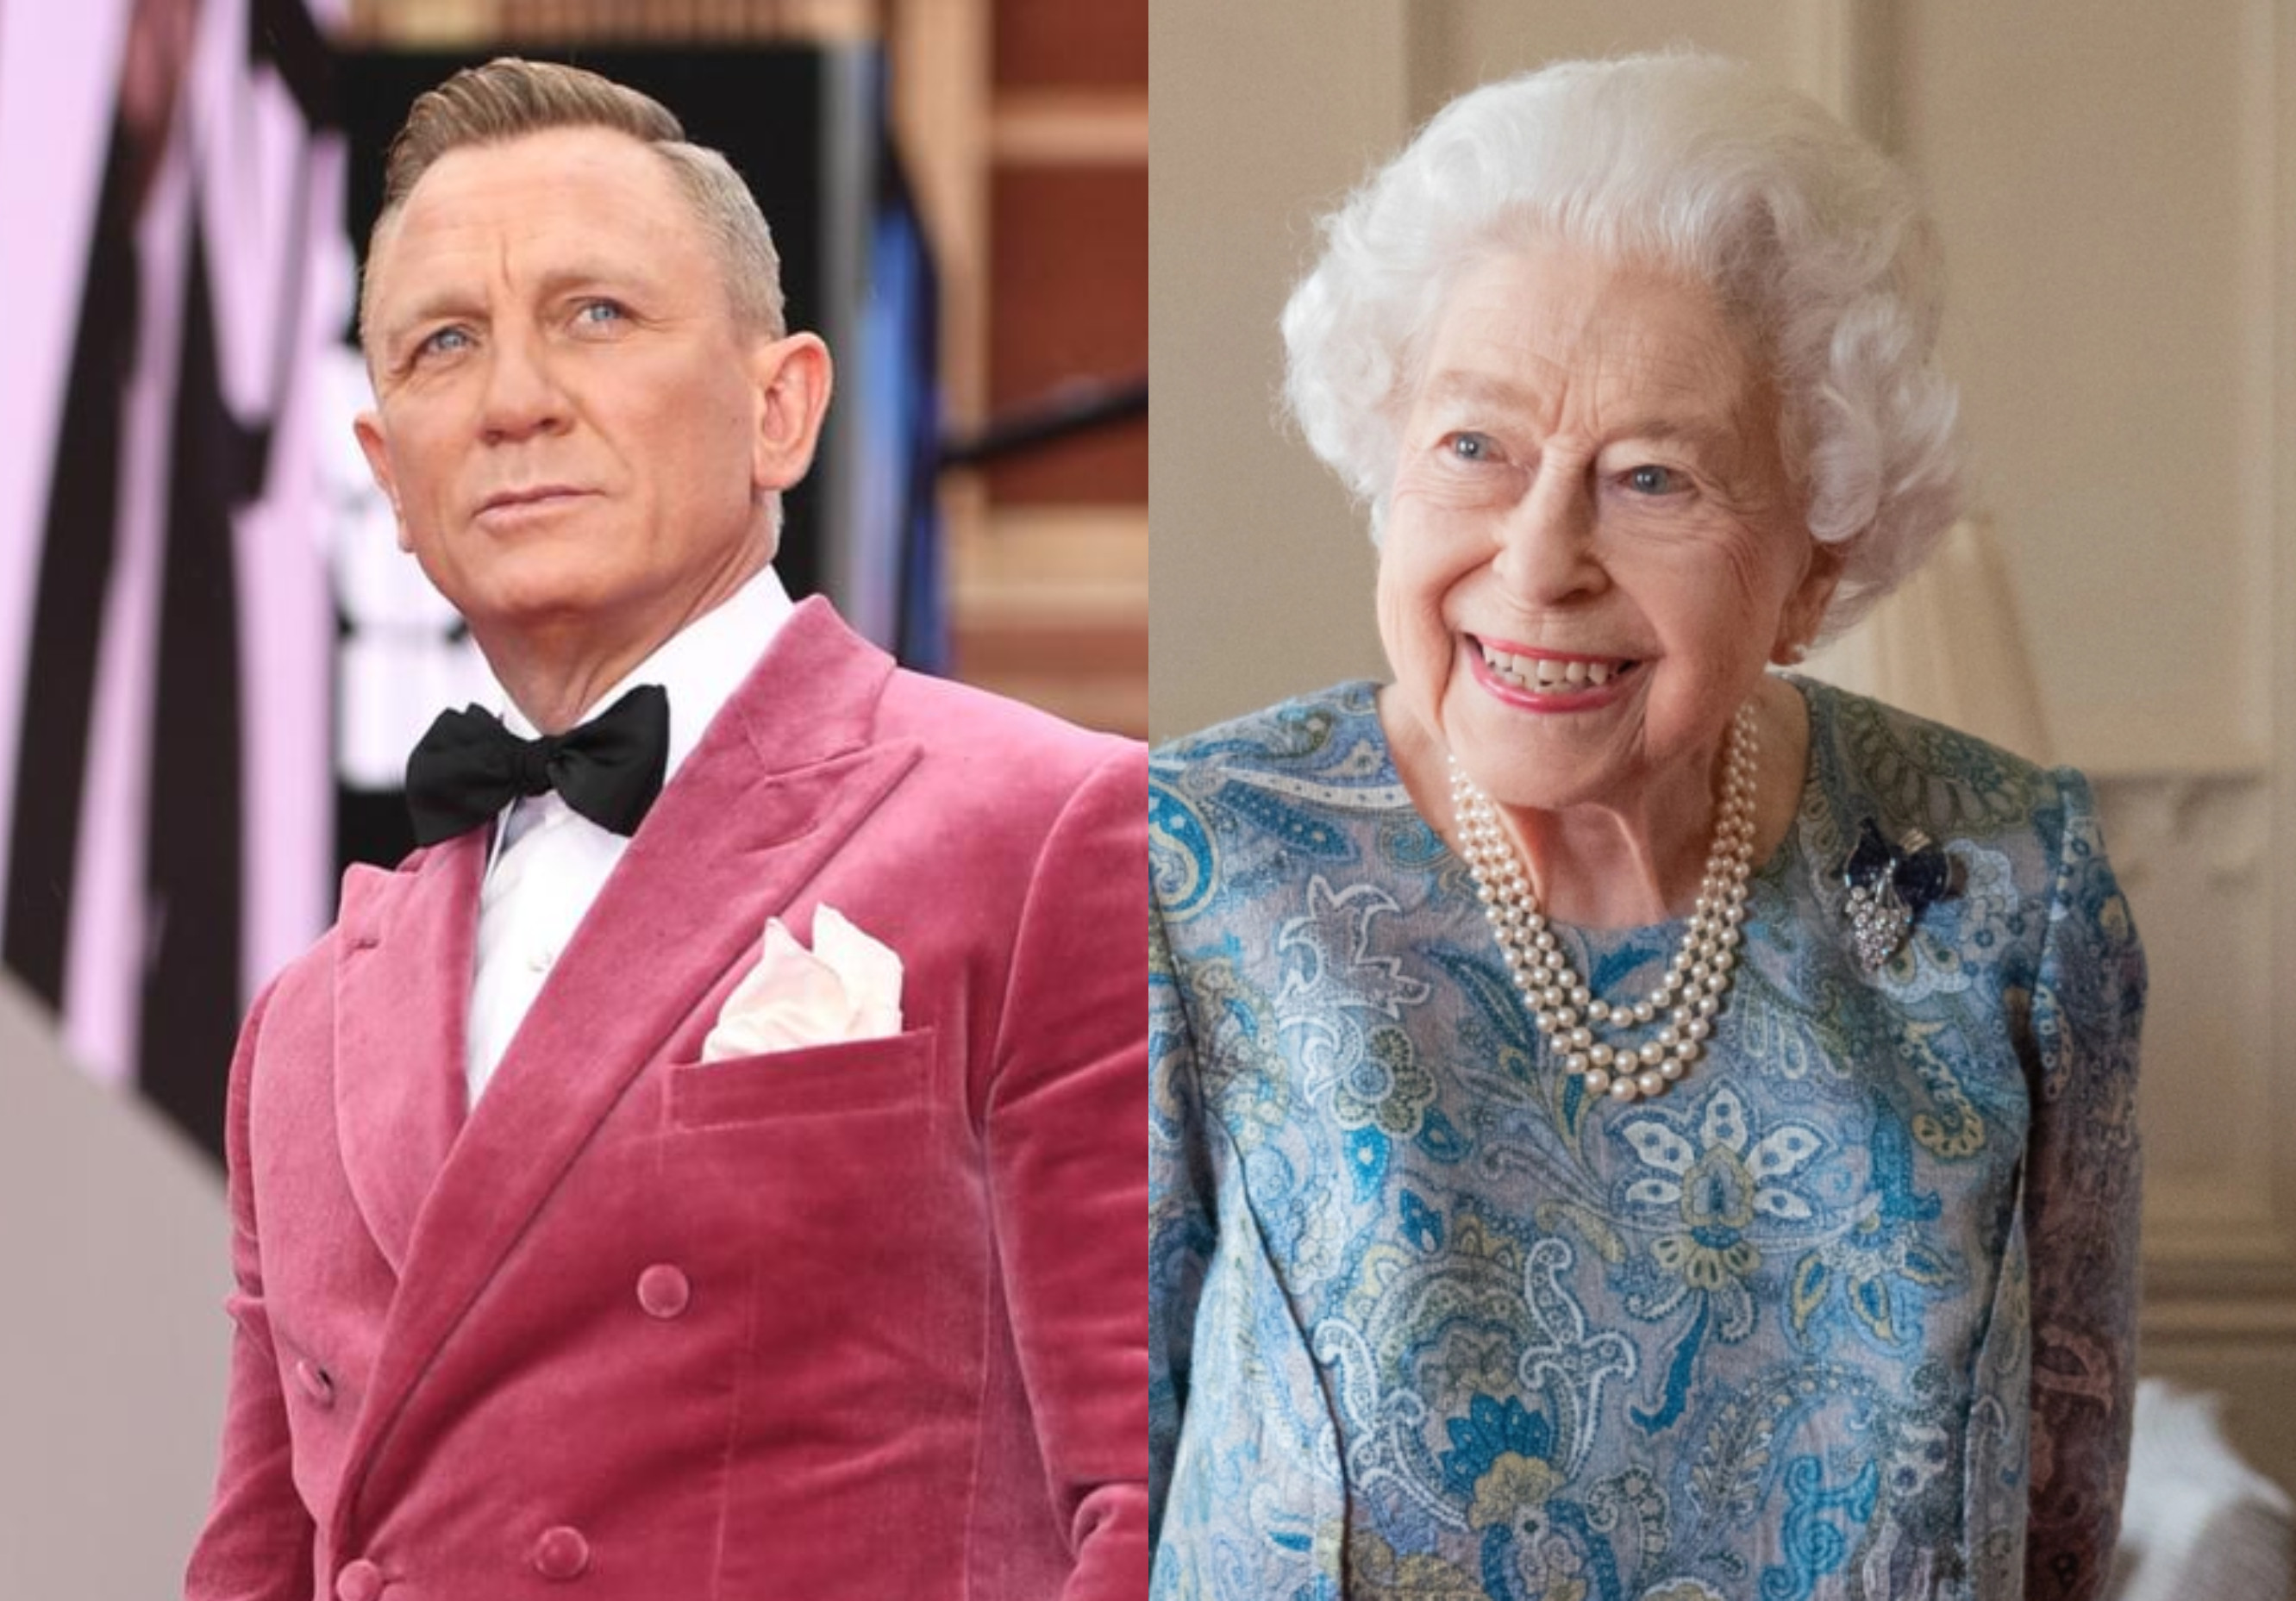 Craig feels ‘very lucky’ to have worked with the Queen | The Express ...